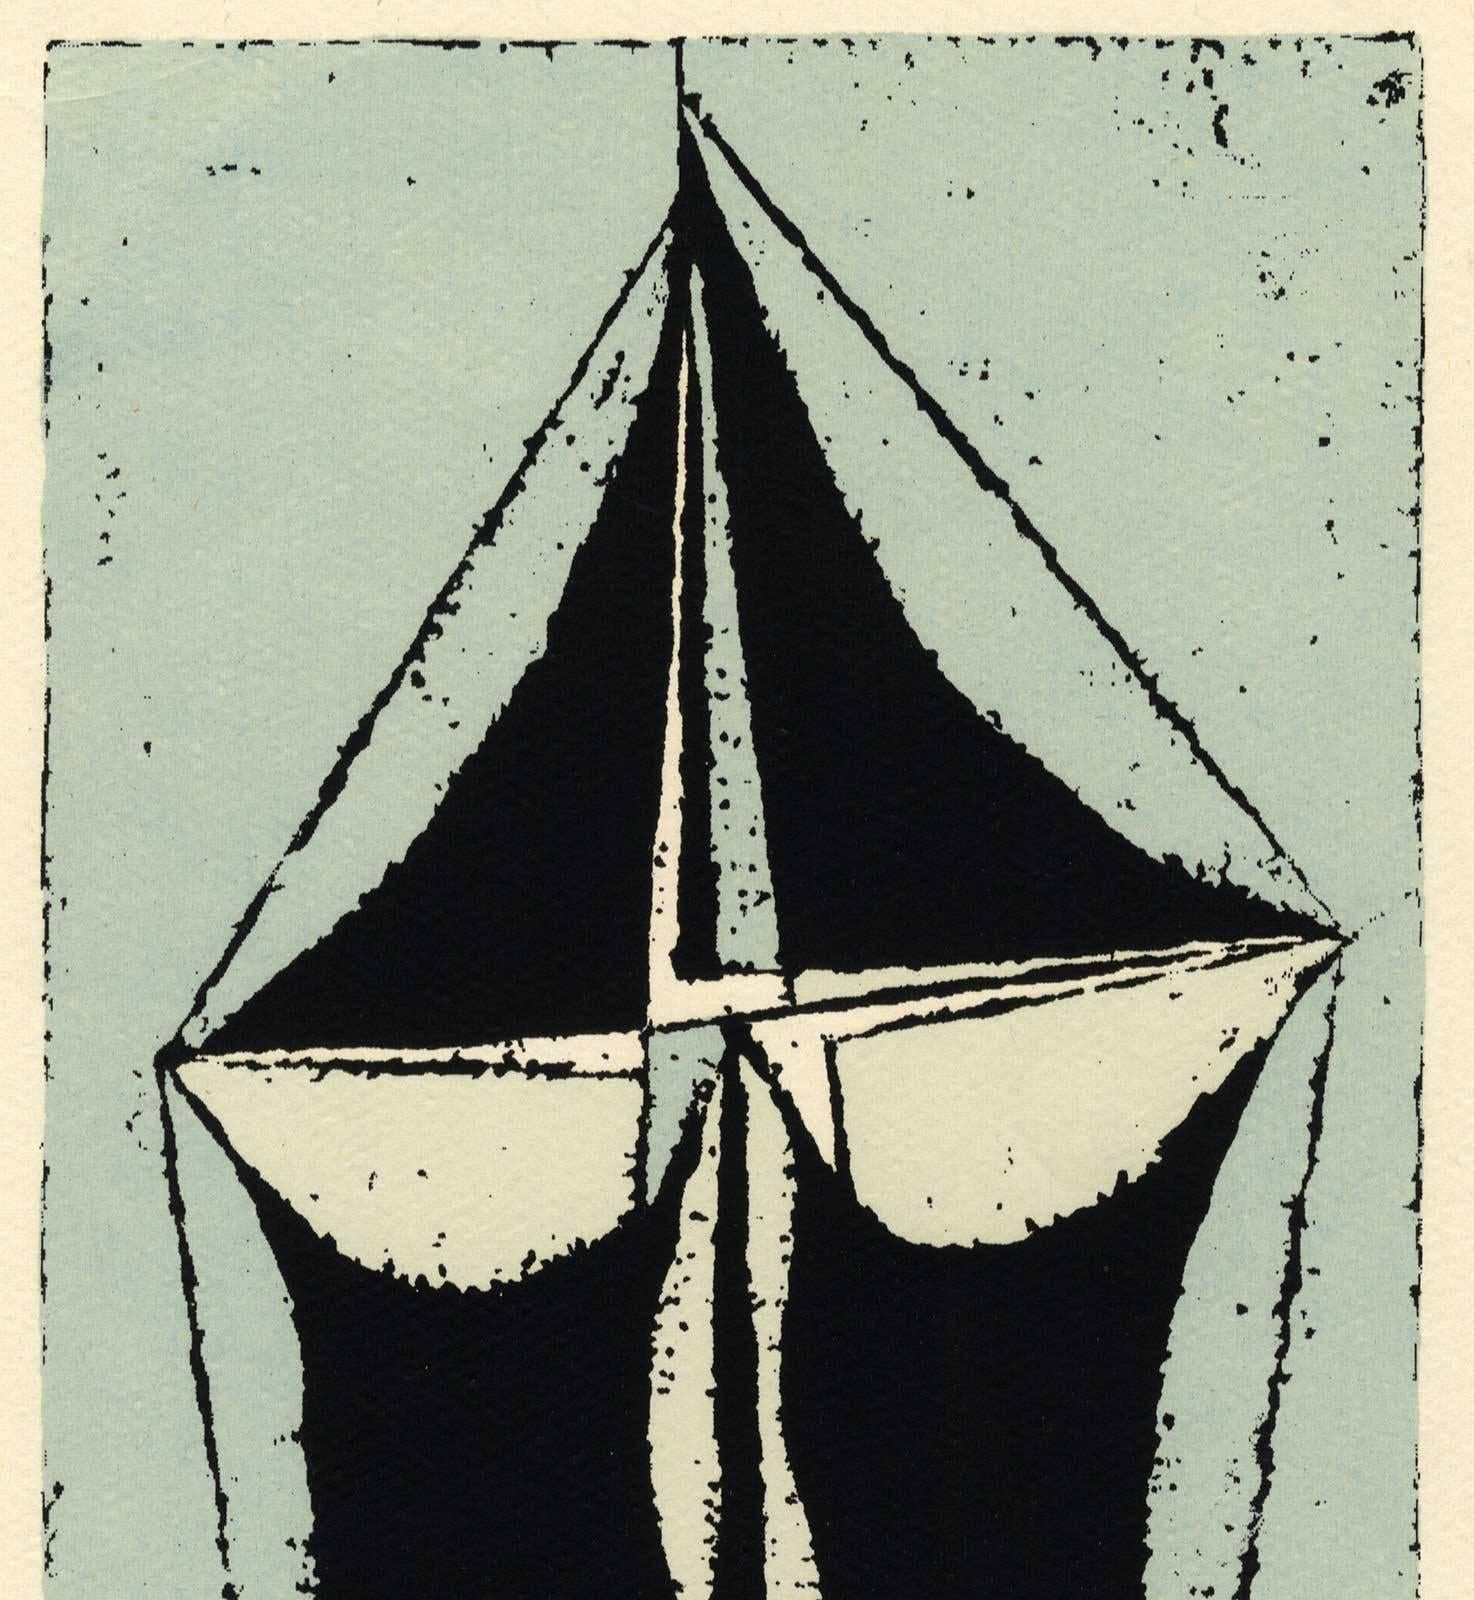 Dark Vessel (one of the very early examples of screenprinting as a fine art) - Print by Edward Landon